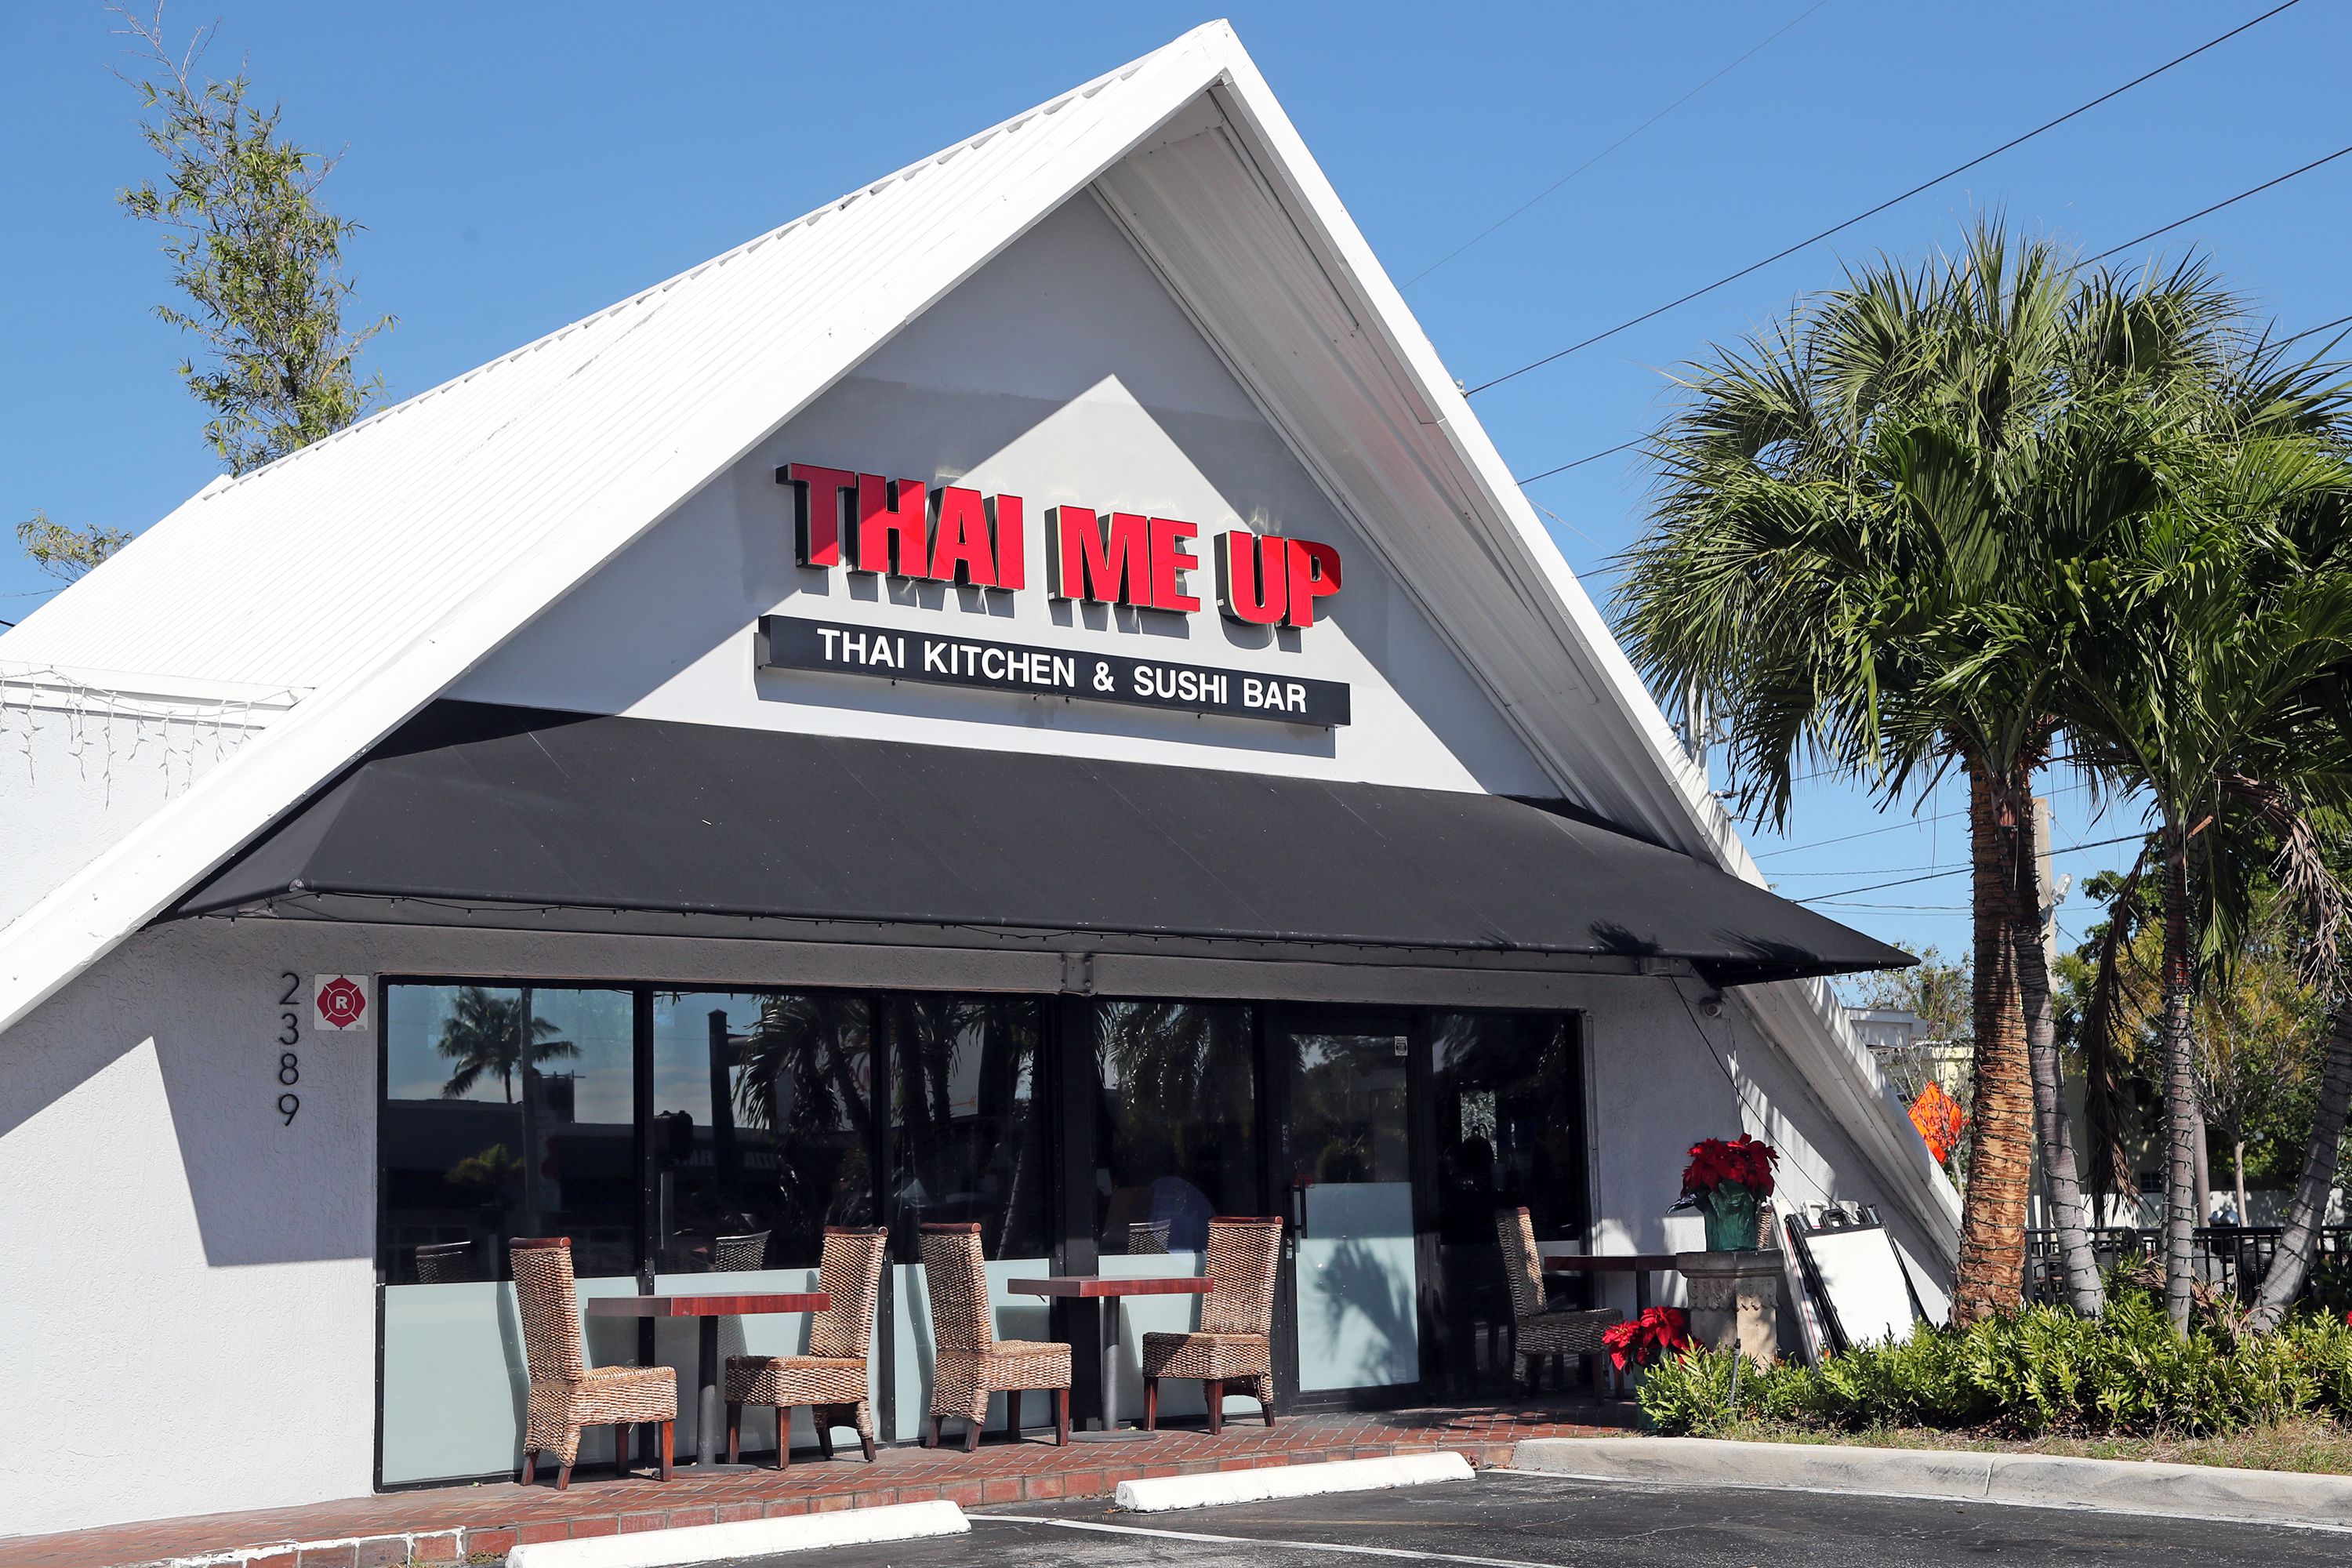 Inappropriate restaurant names that make you look twice | PHOTOS – Sun  Sentinel